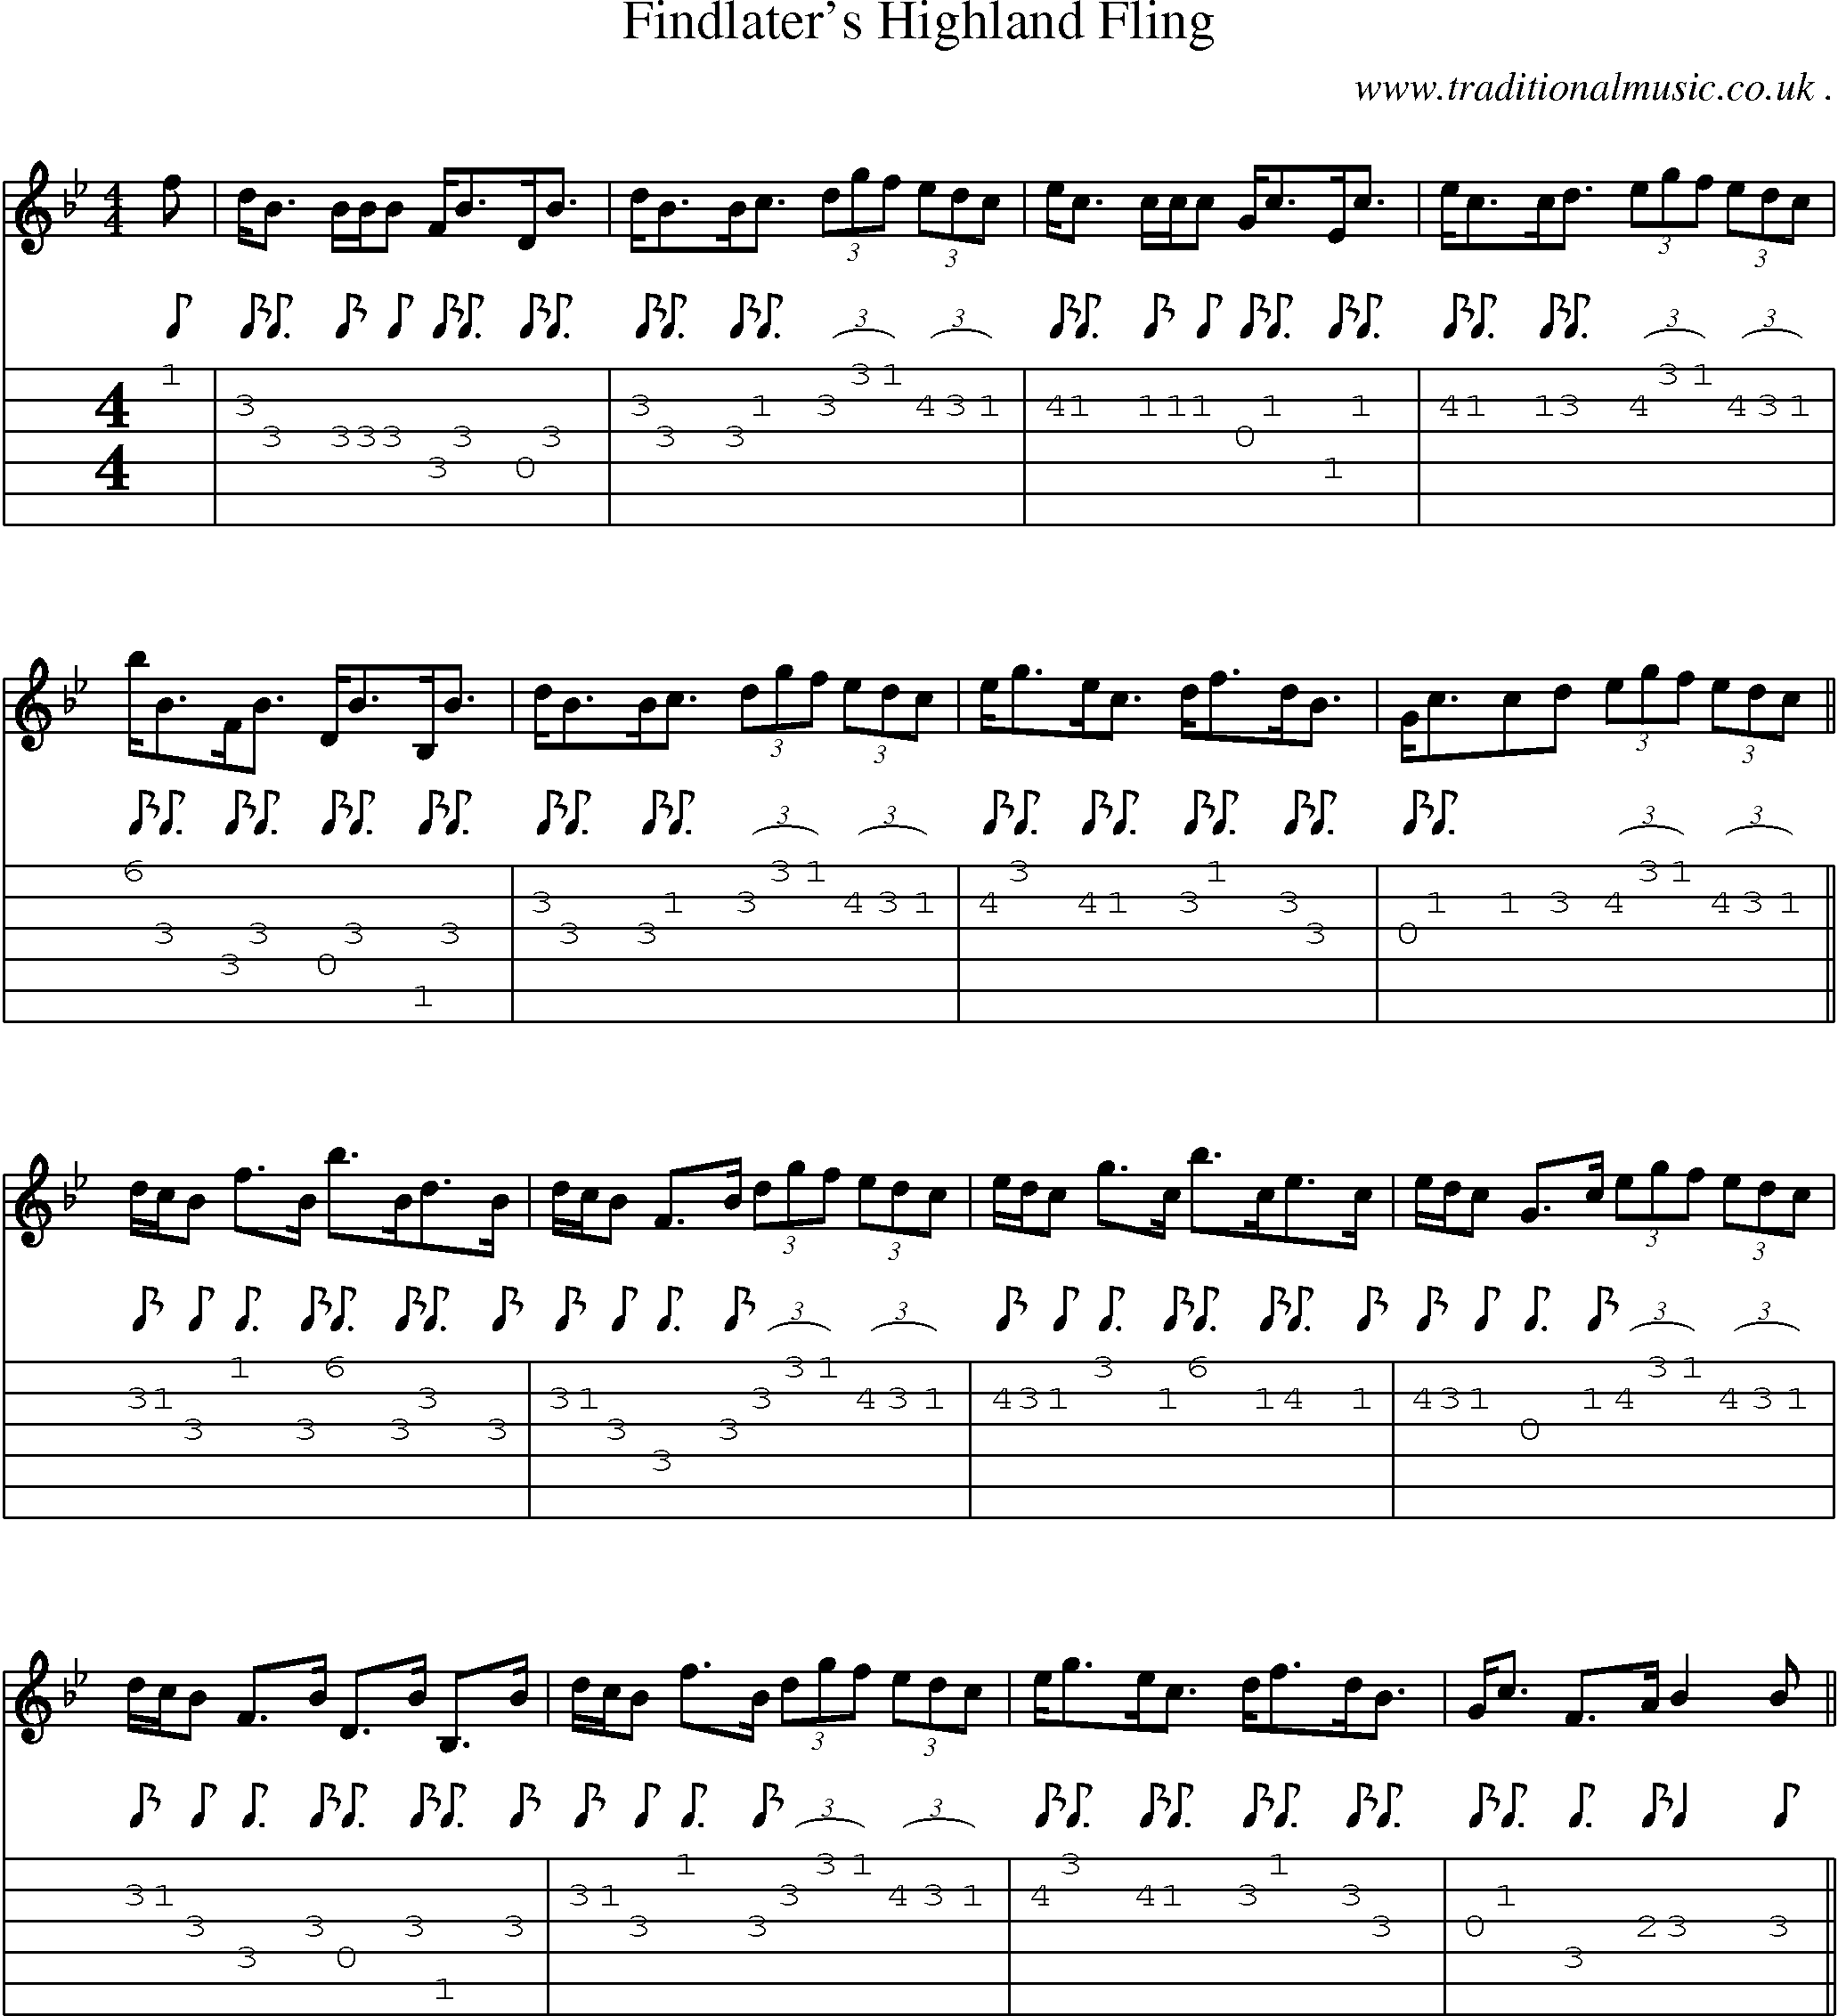 Sheet-Music and Guitar Tabs for Findlaters Highland Fling